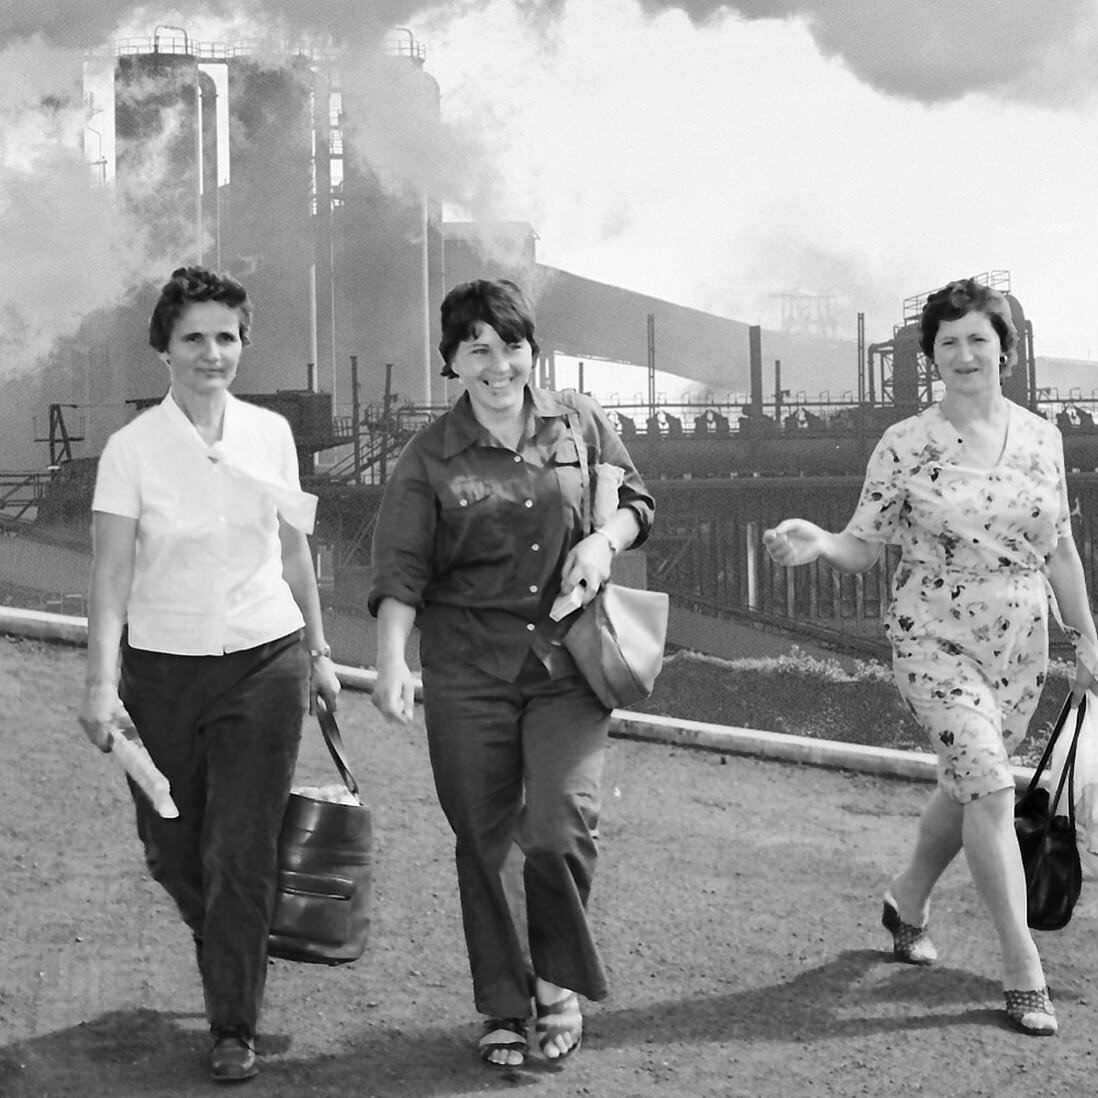 Available to rent online courtesy of the Sydney Film Festival - Robynne Murphy&rsquo;s film Women of Steel - capturing women&rsquo;s fight for equal rights to work for BHP (now Bluescope Steel). https://ondemand.sff.org.au/film/women-of-steel/

#wome